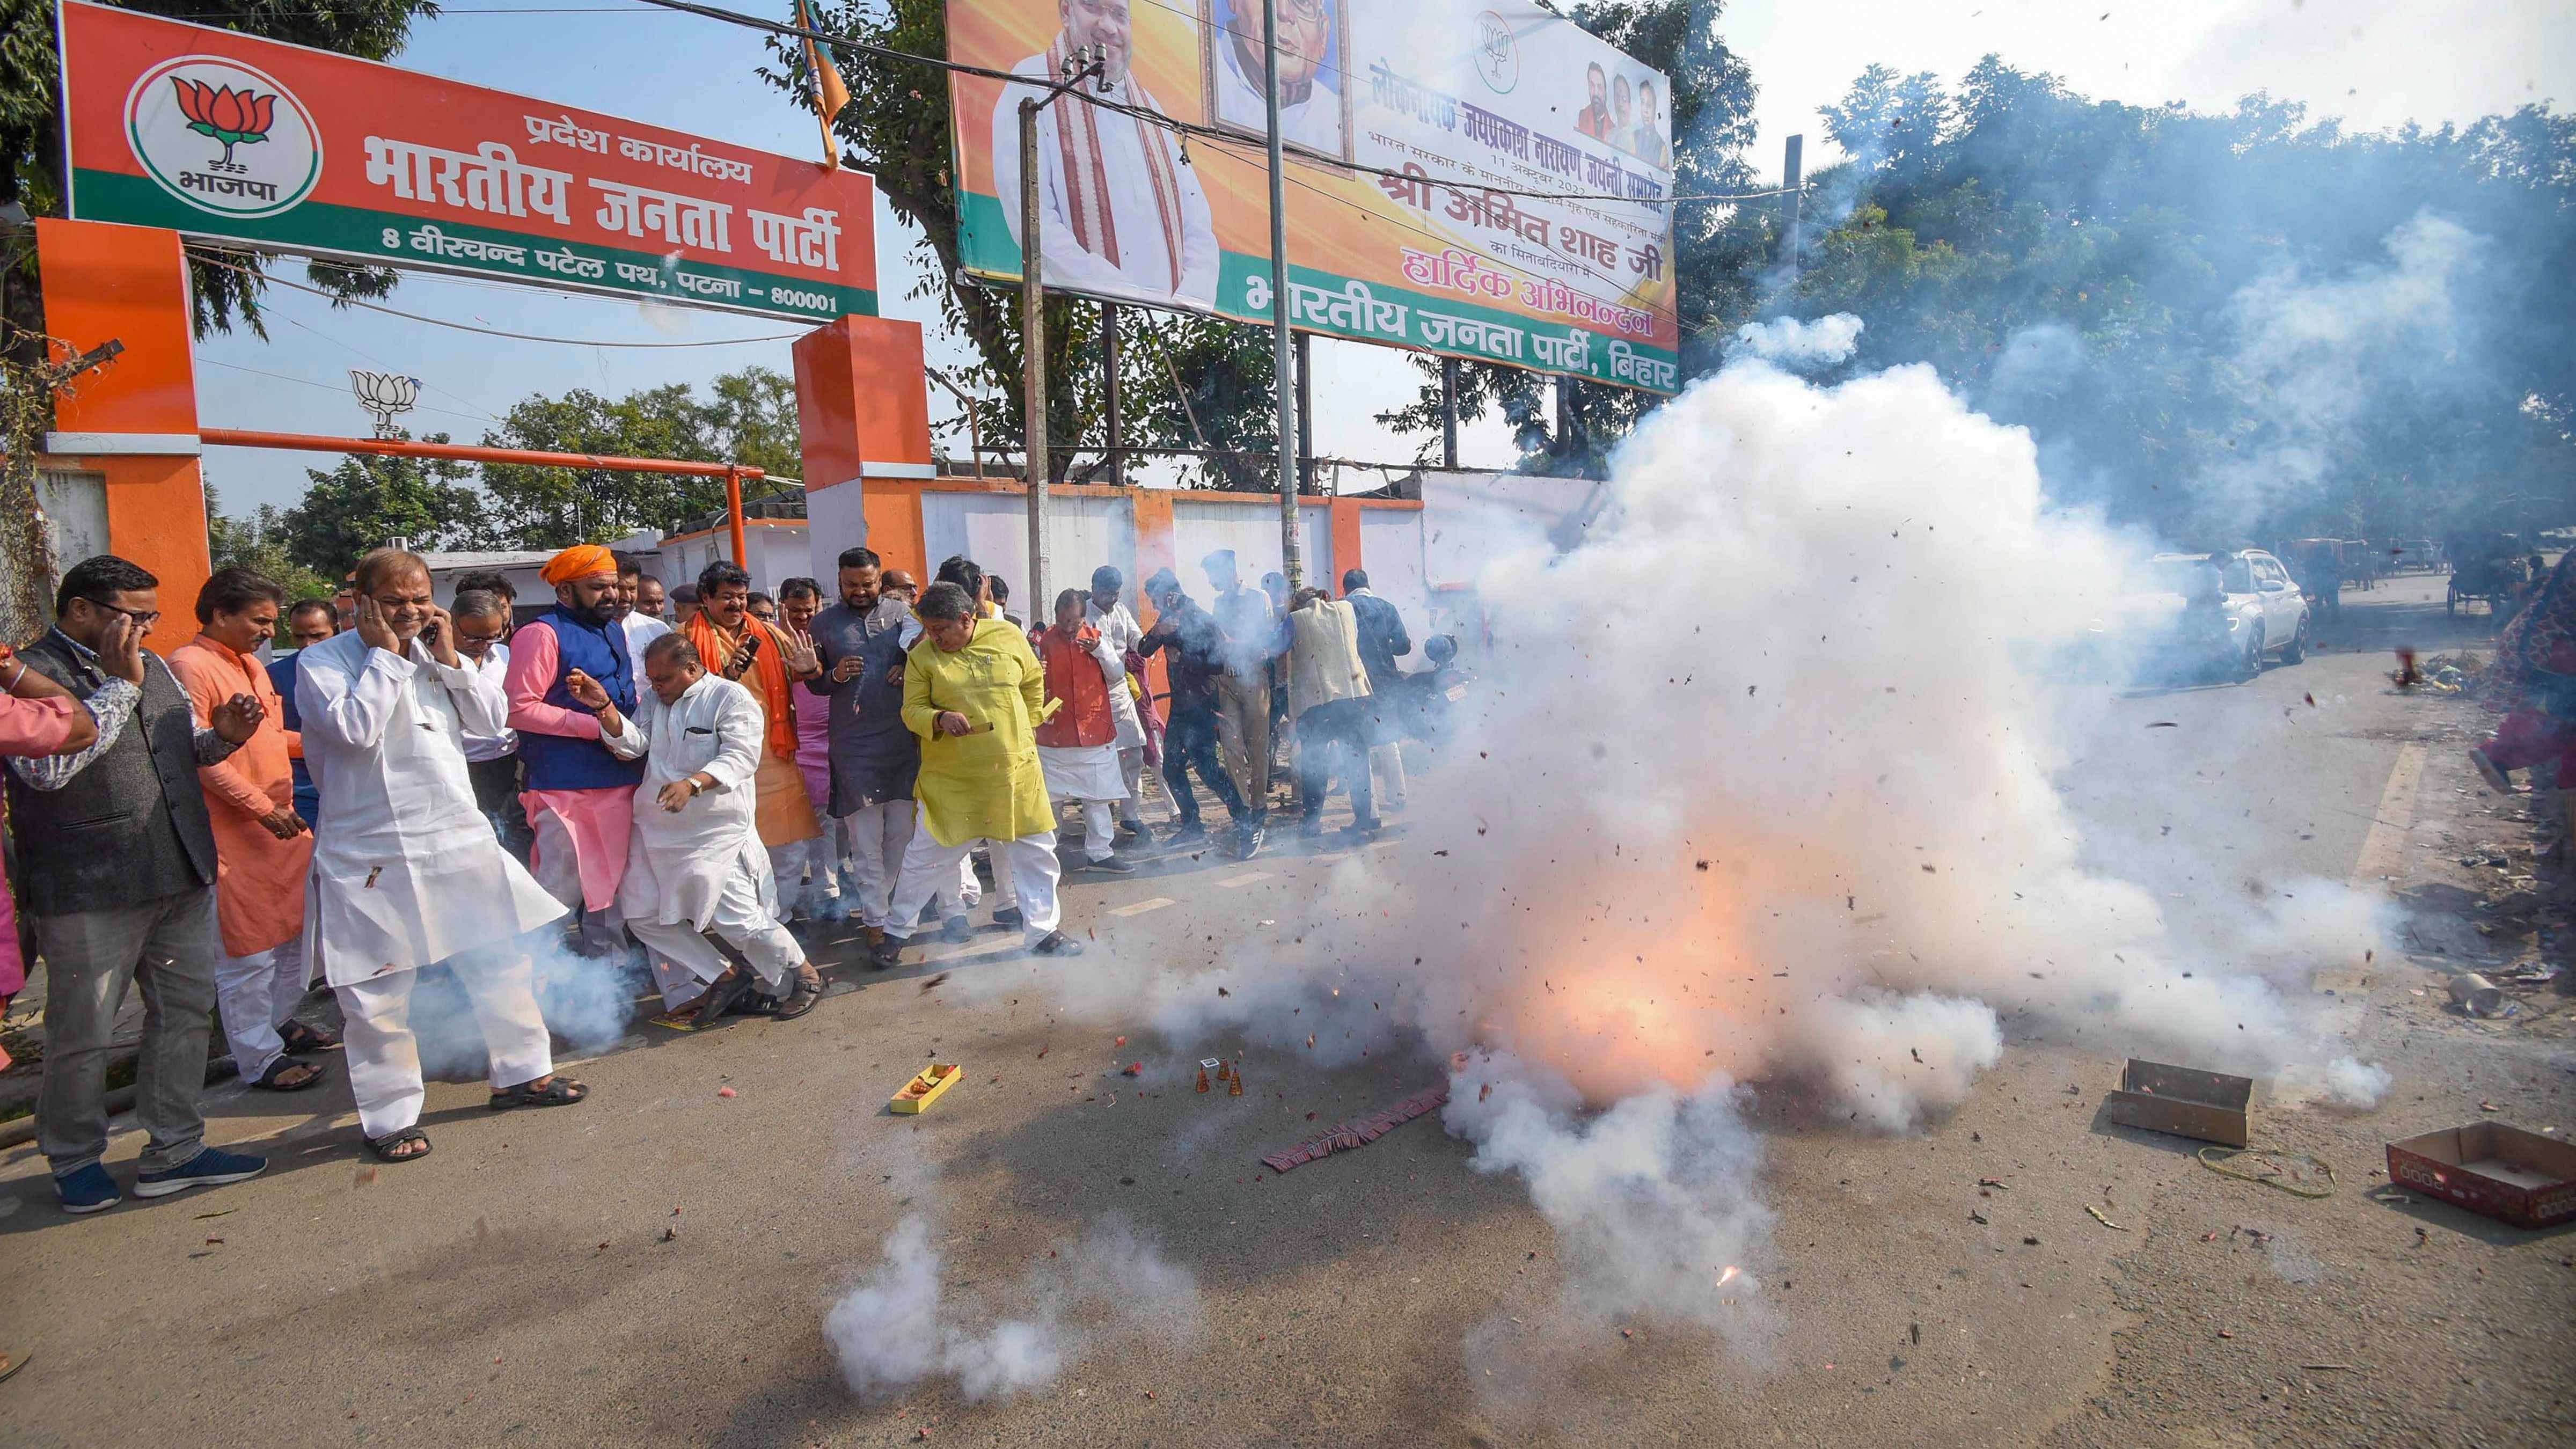 Supporters burst firecrackers to celebrate after BJP candidate Kusum Devi won from Gopalganj. Credit: PTI Photo